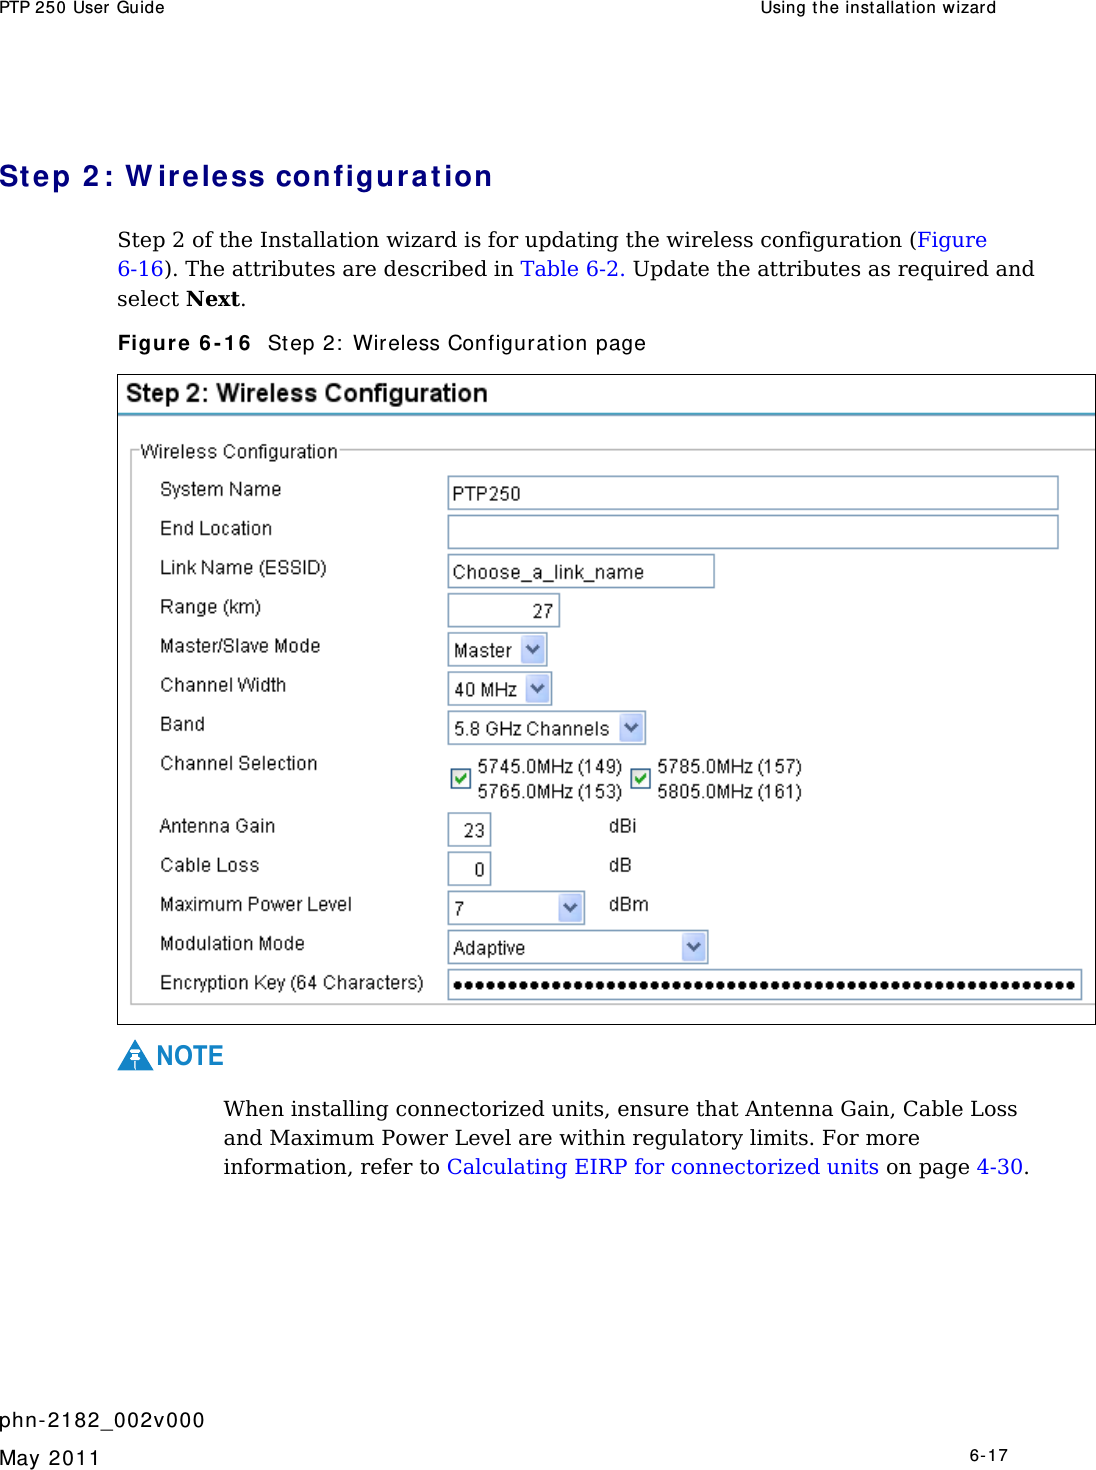 PTP 250 User Guide  Using the inst allation wizar d   phn- 2182_002v000   May 2011   6-17  Step 2 : W ire less configur a t ion Step 2 of the Installation wizard is for updating the wireless configuration (Figure 6-16). The attributes are described in Table 6-2. Update the attributes as required and select Next. Figure 6 - 1 6   St ep 2:  Wireless Configurat ion page  NOTE  When installing connectorized units, ensure that Antenna Gain, Cable Loss and Maximum Power Level are within regulatory limits. For more information, refer to Calculating EIRP for connectorized units on page 4-30.